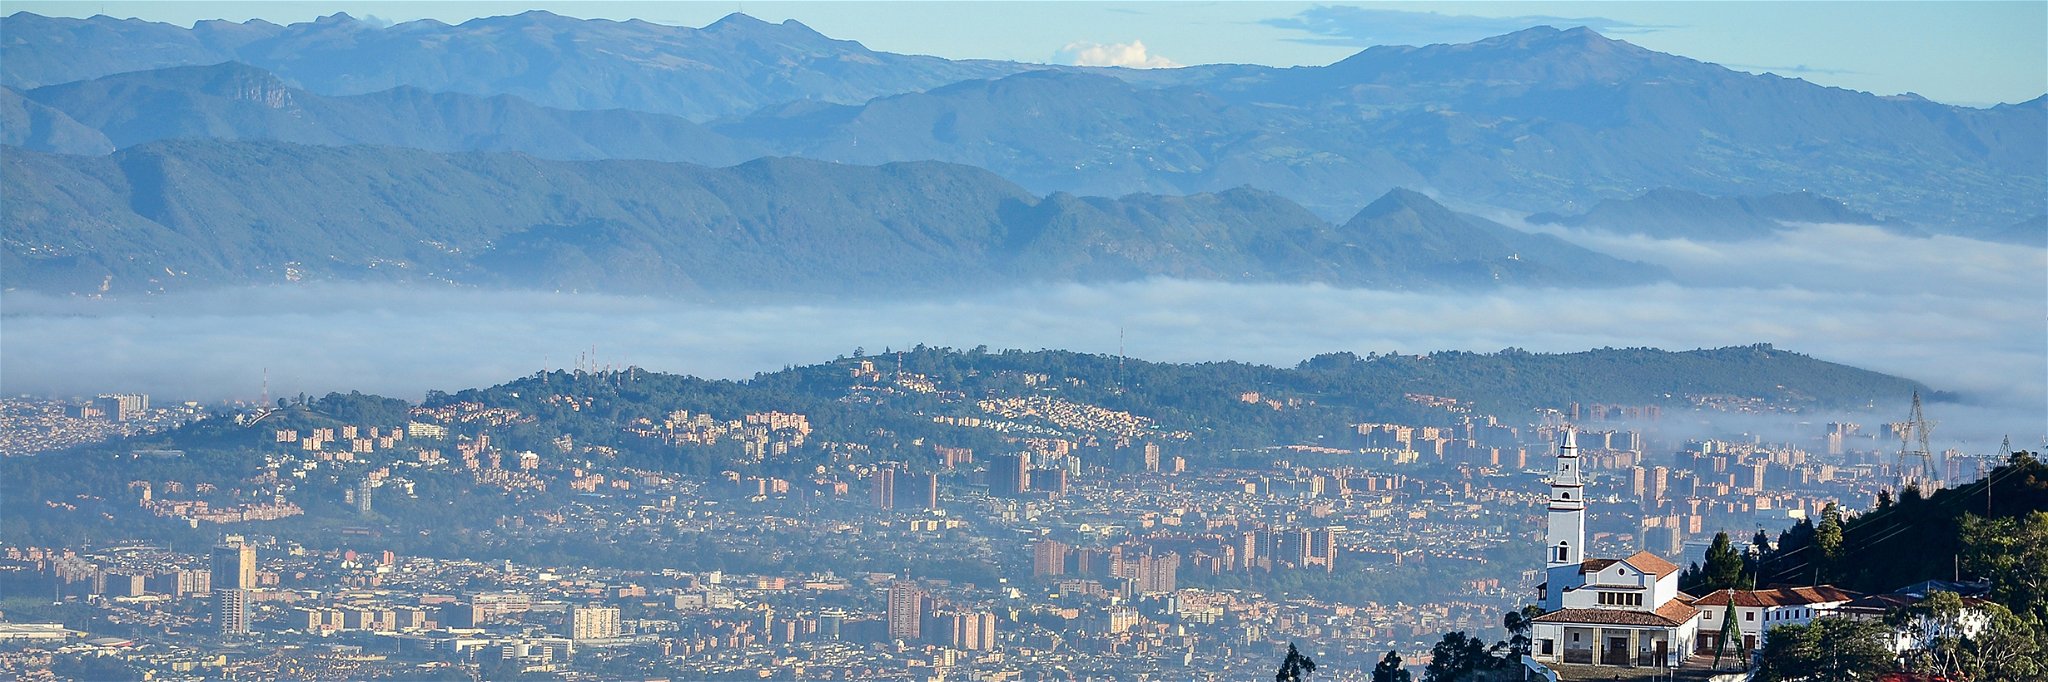 Aerial view of Bogota, Colombia.